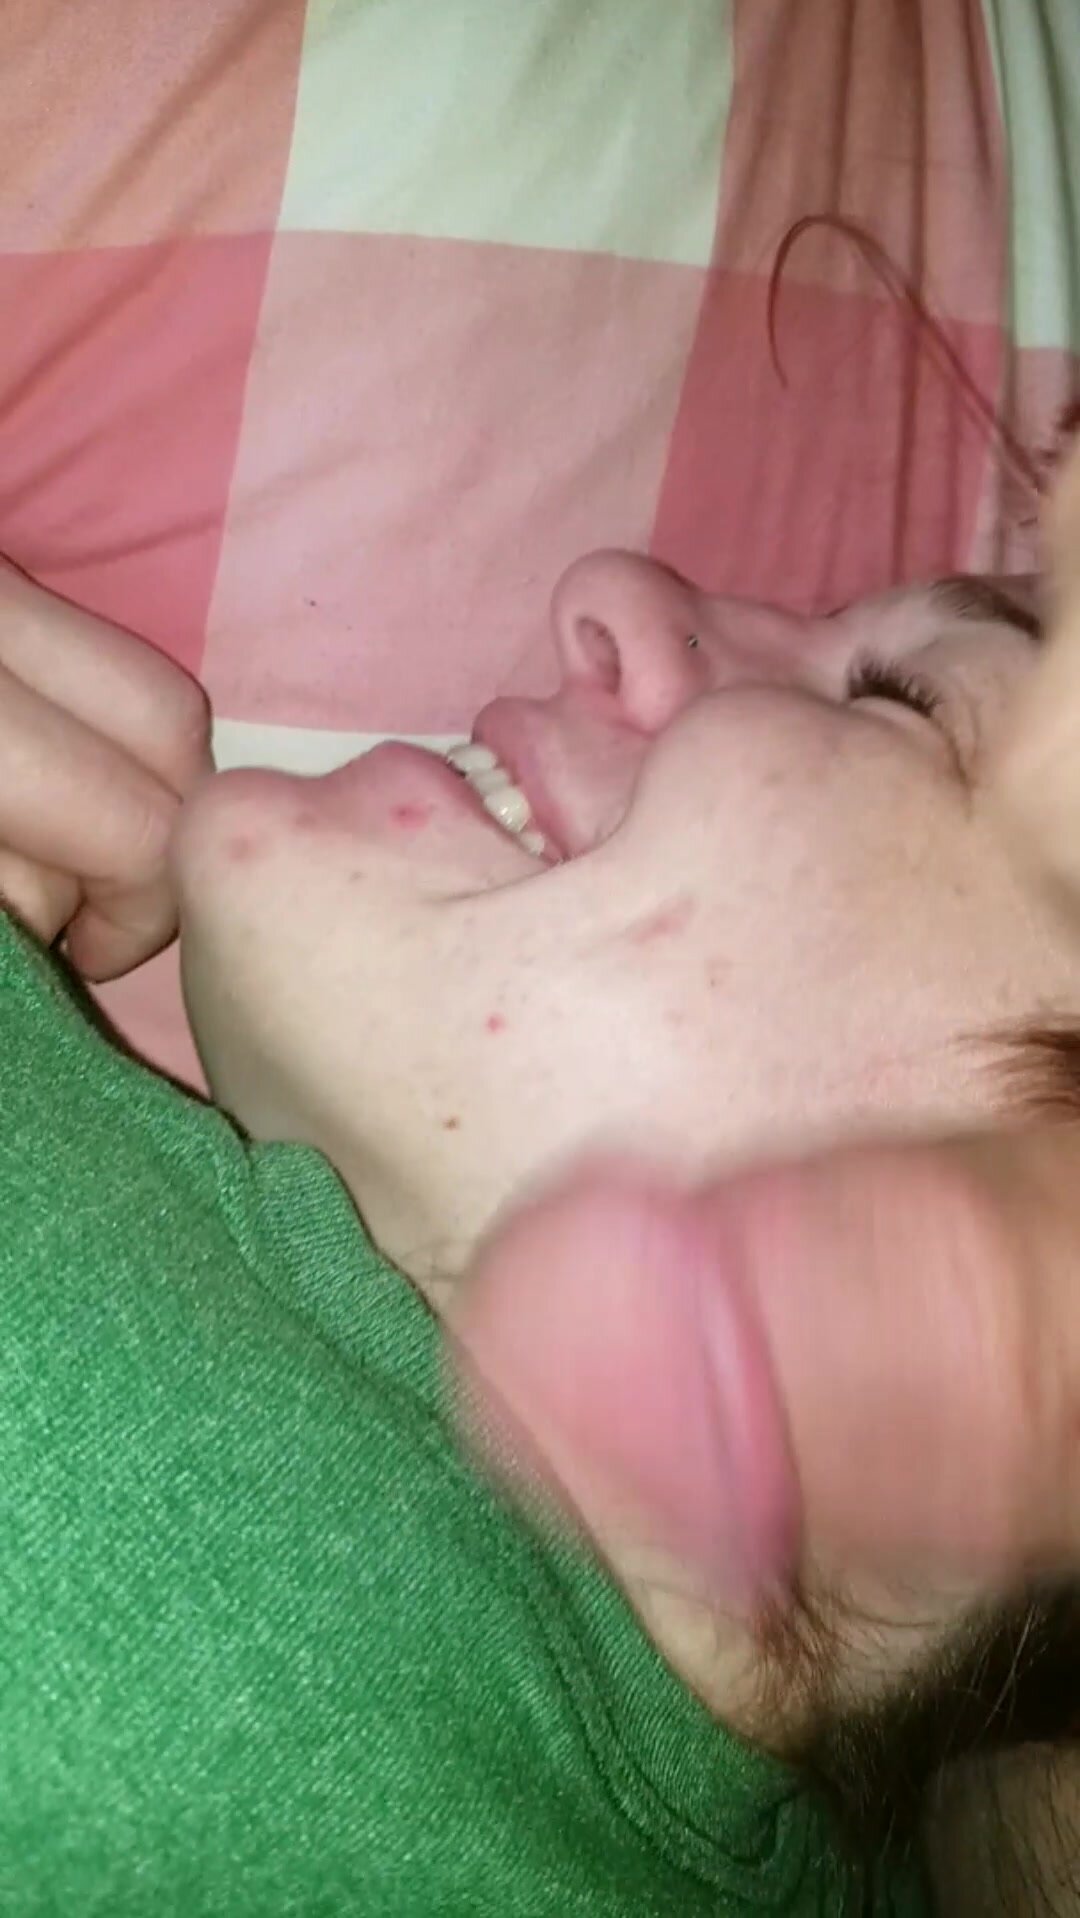 Cock Rubbing On Teens Face - ThisVid.com